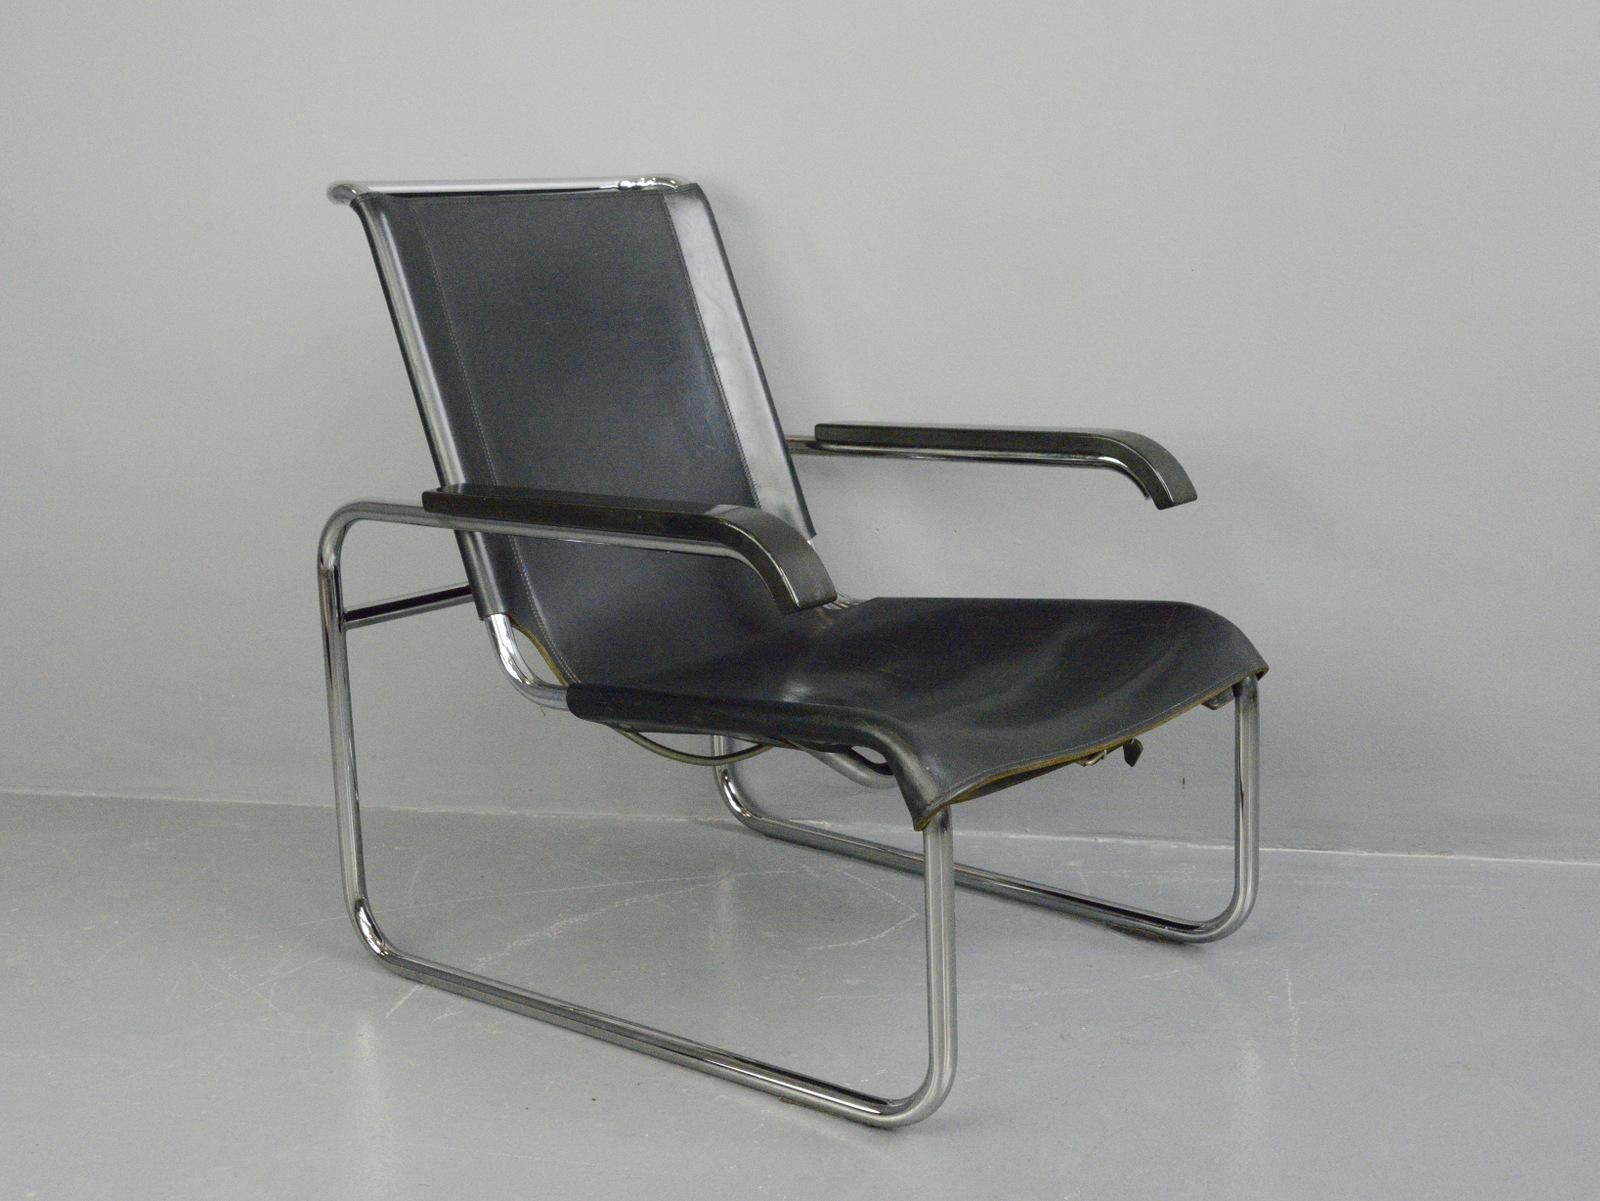 Bauhaus lounge chair by Marcel Breuer for Thonet

- Chromed tubular steel frame
- Sprung cantilever seat
- Buffalo leather seat
- Model B35
- First designed by Marcel Breuer in 1928
- Produced by Thonet
- German, 1970s
- Measures: 65cm wide x 85cm